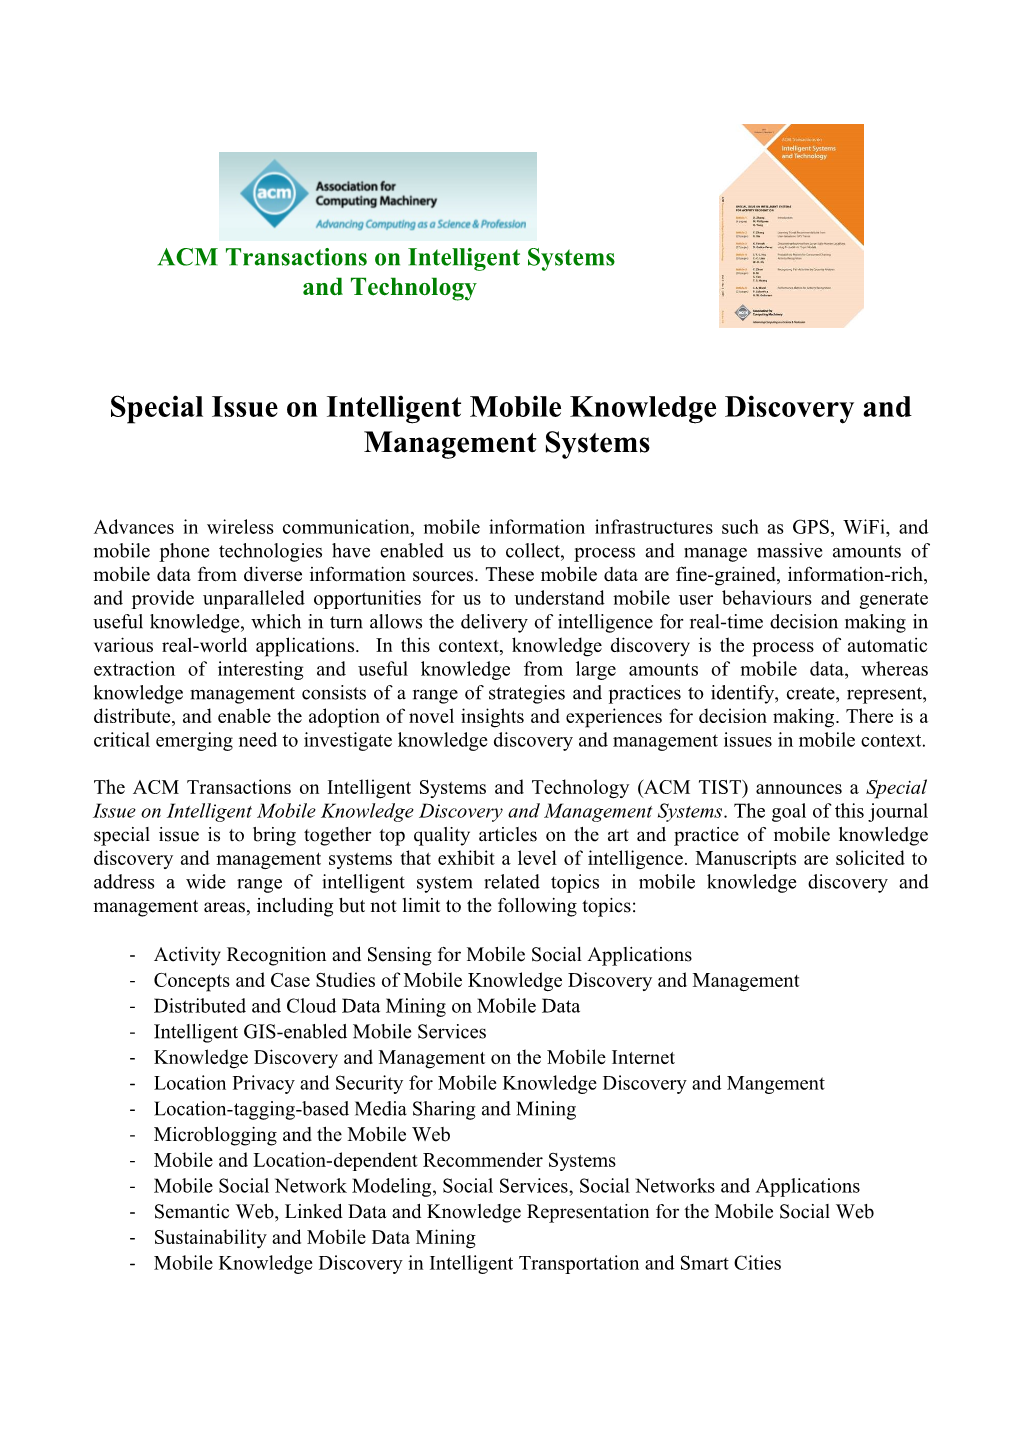 Special Issue on Intelligent Mobile Knowledge Discovery and Management Systems